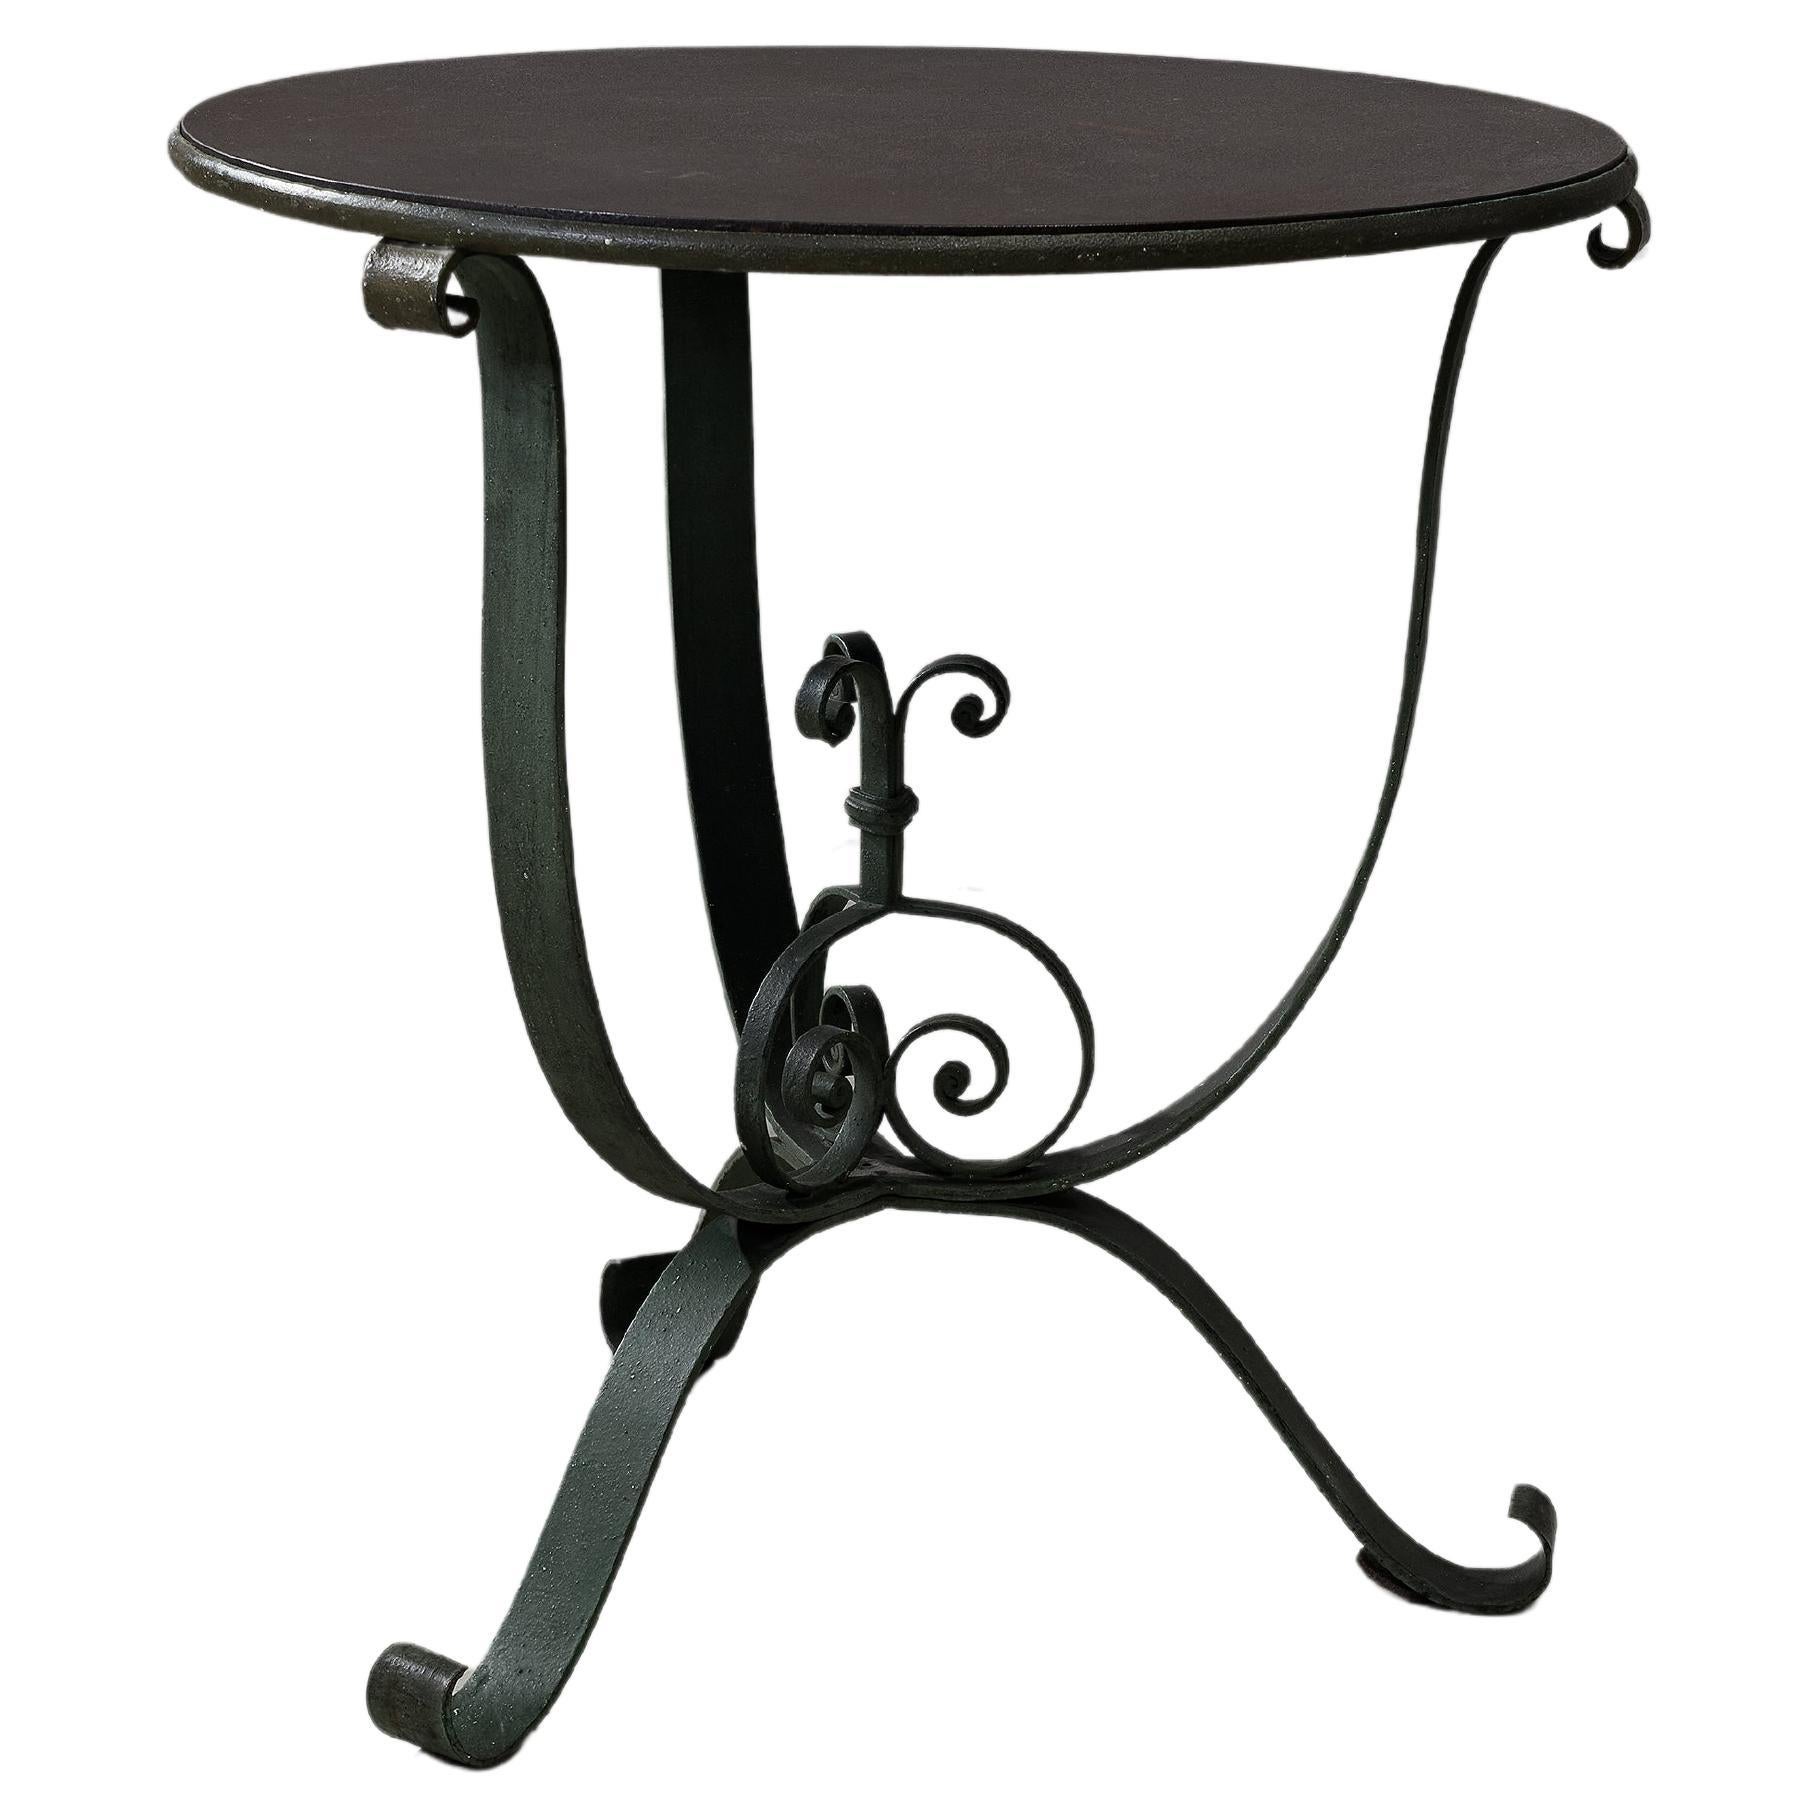 A French Art Deco style Green Patinated Wrought Iron Table (1920s-1930s) For Sale